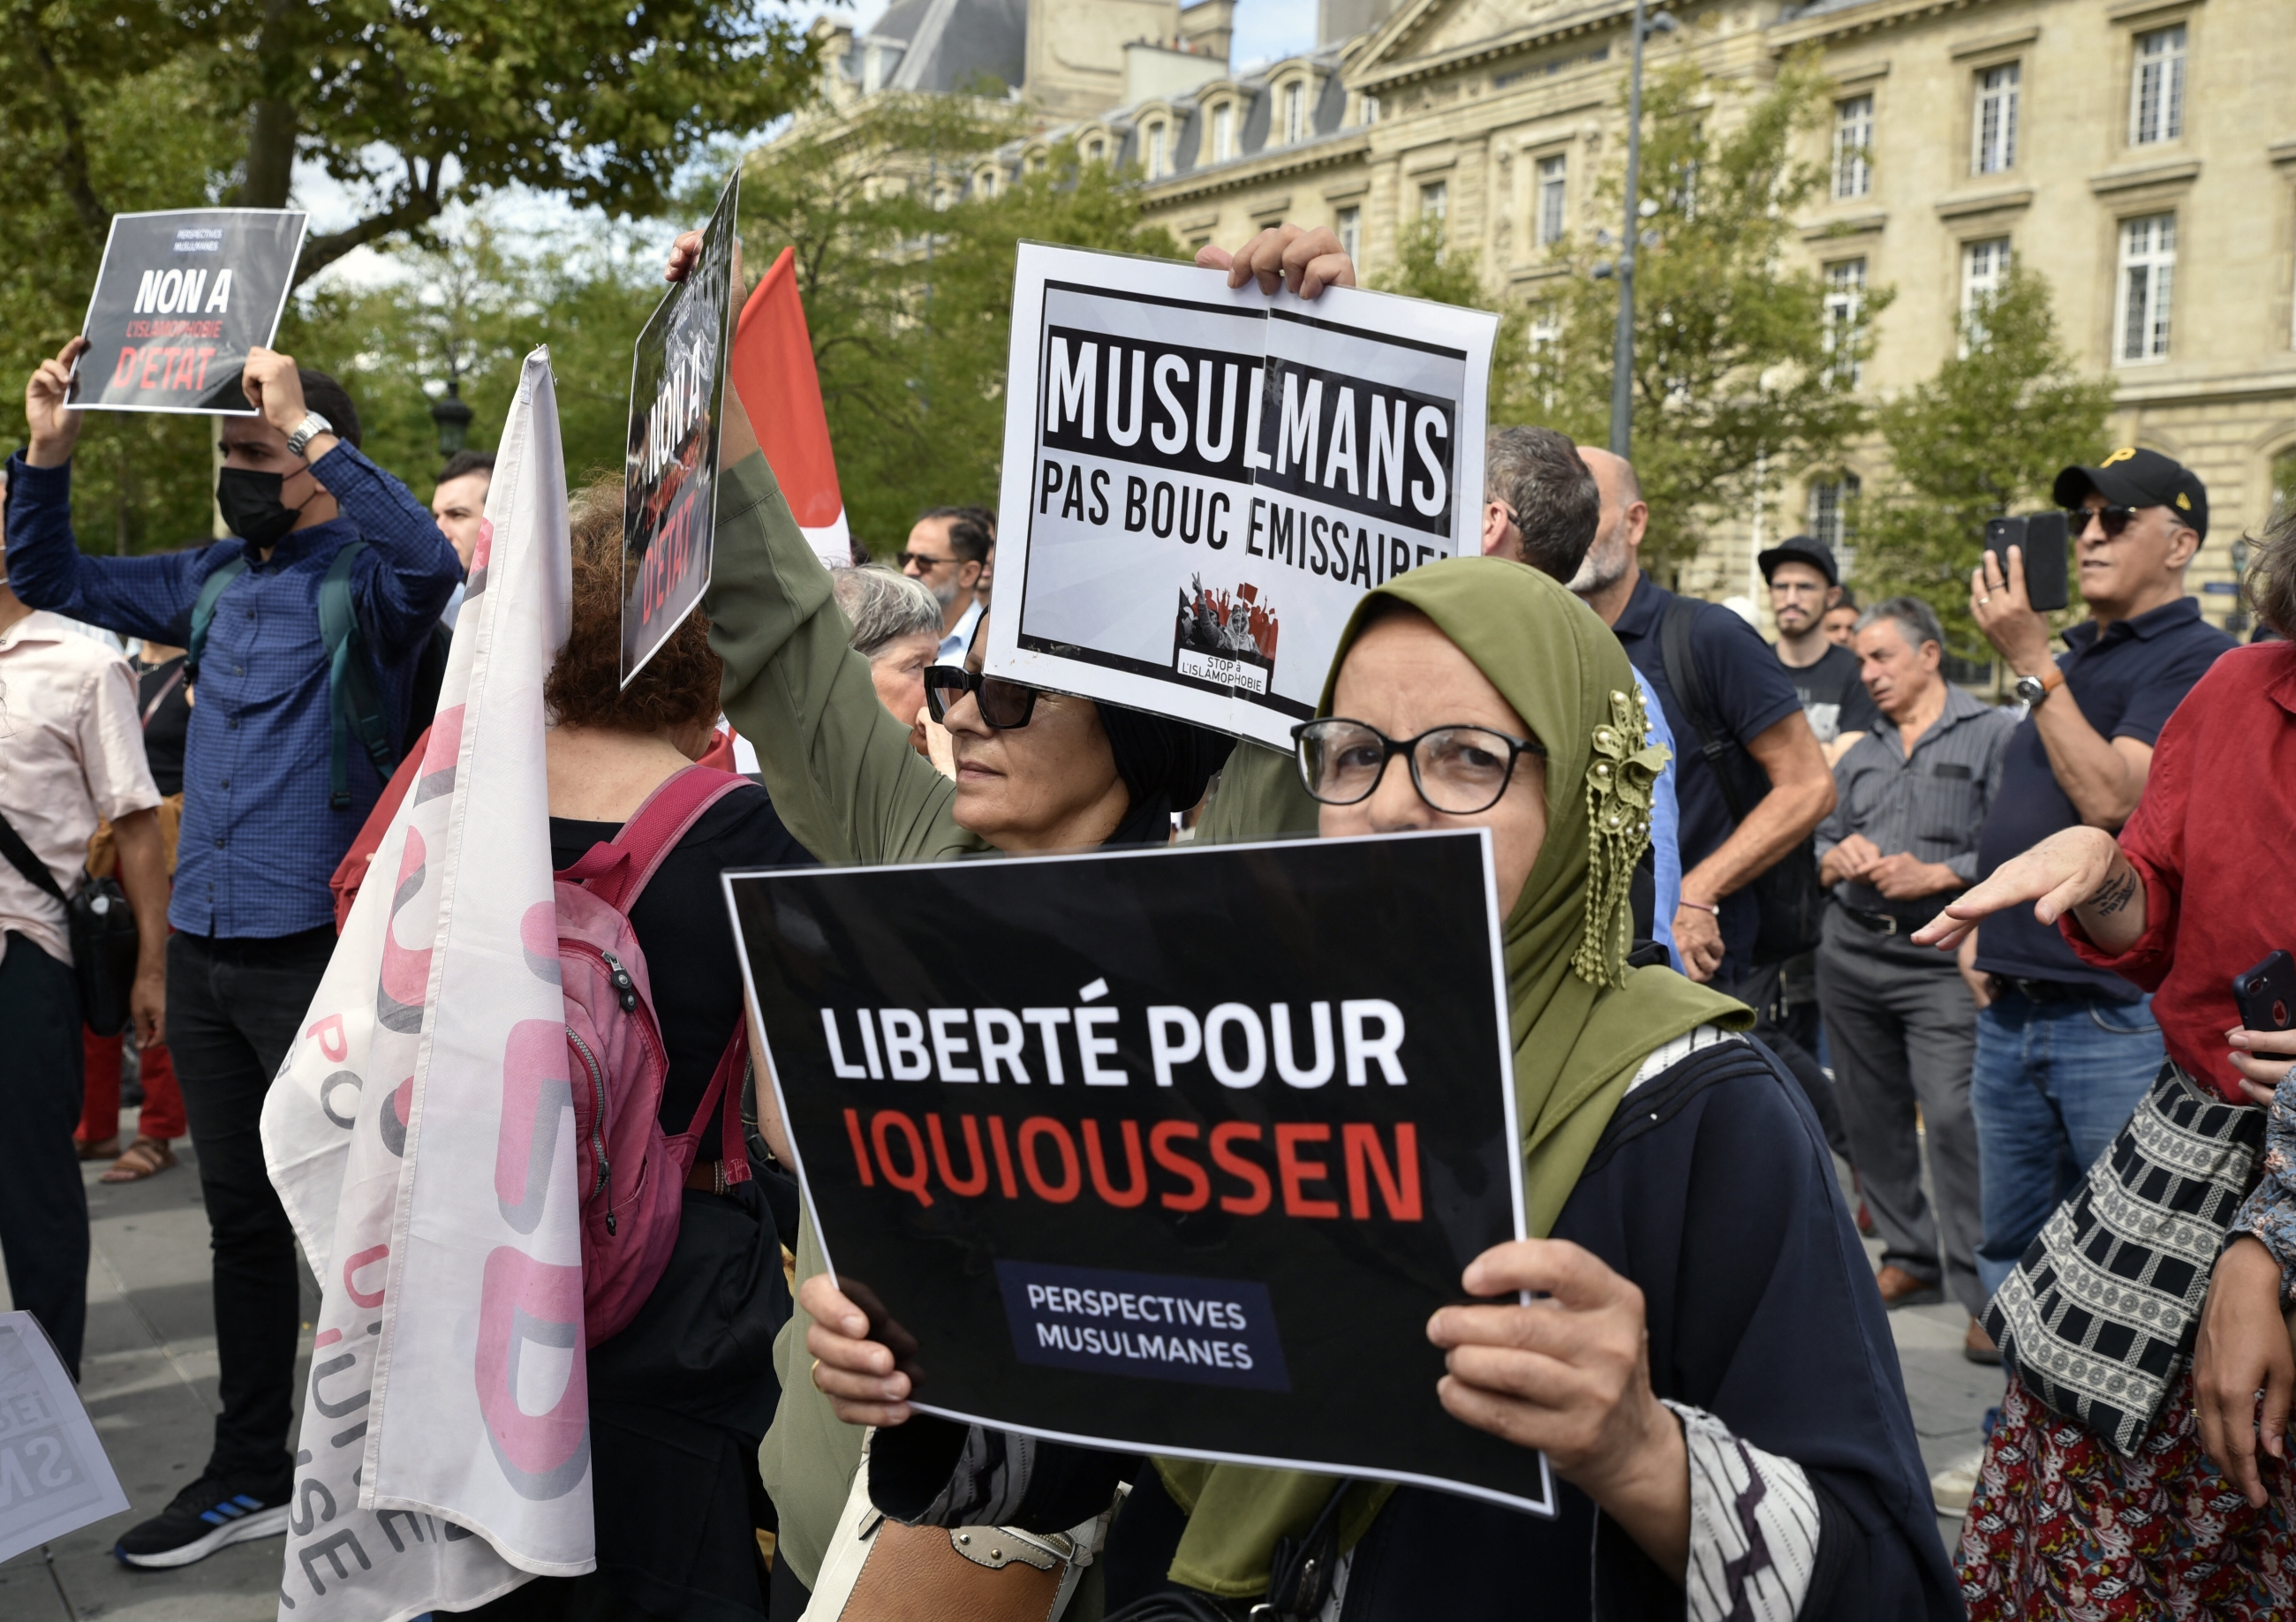 The French Muslim Perspectives Association protests against Islamophobia in Paris on 3 September 2022 (AFP)